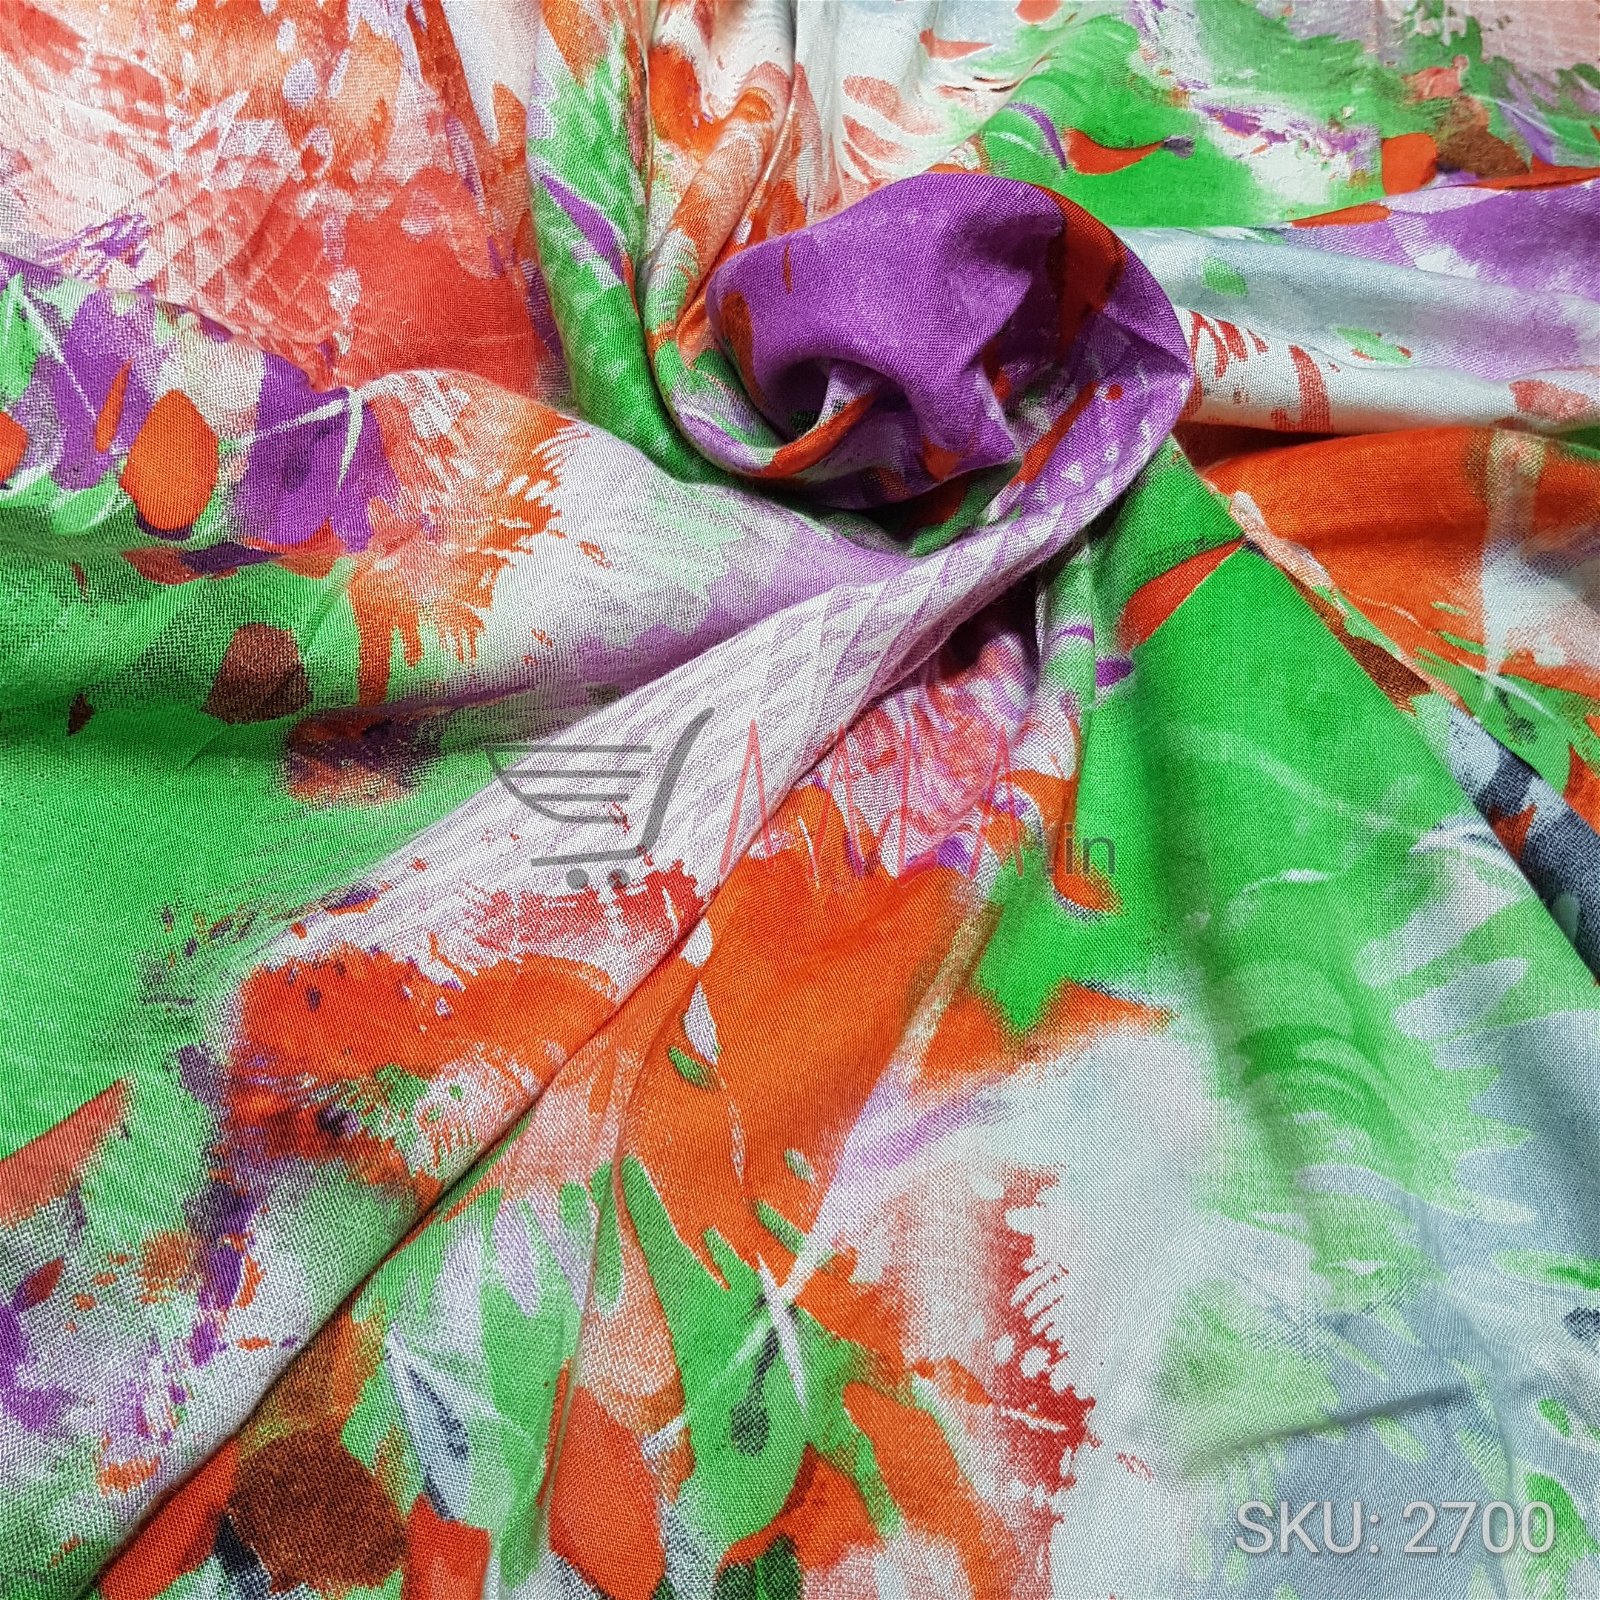 Printed Rayon Cotton 44 Inches Per Metre #2700